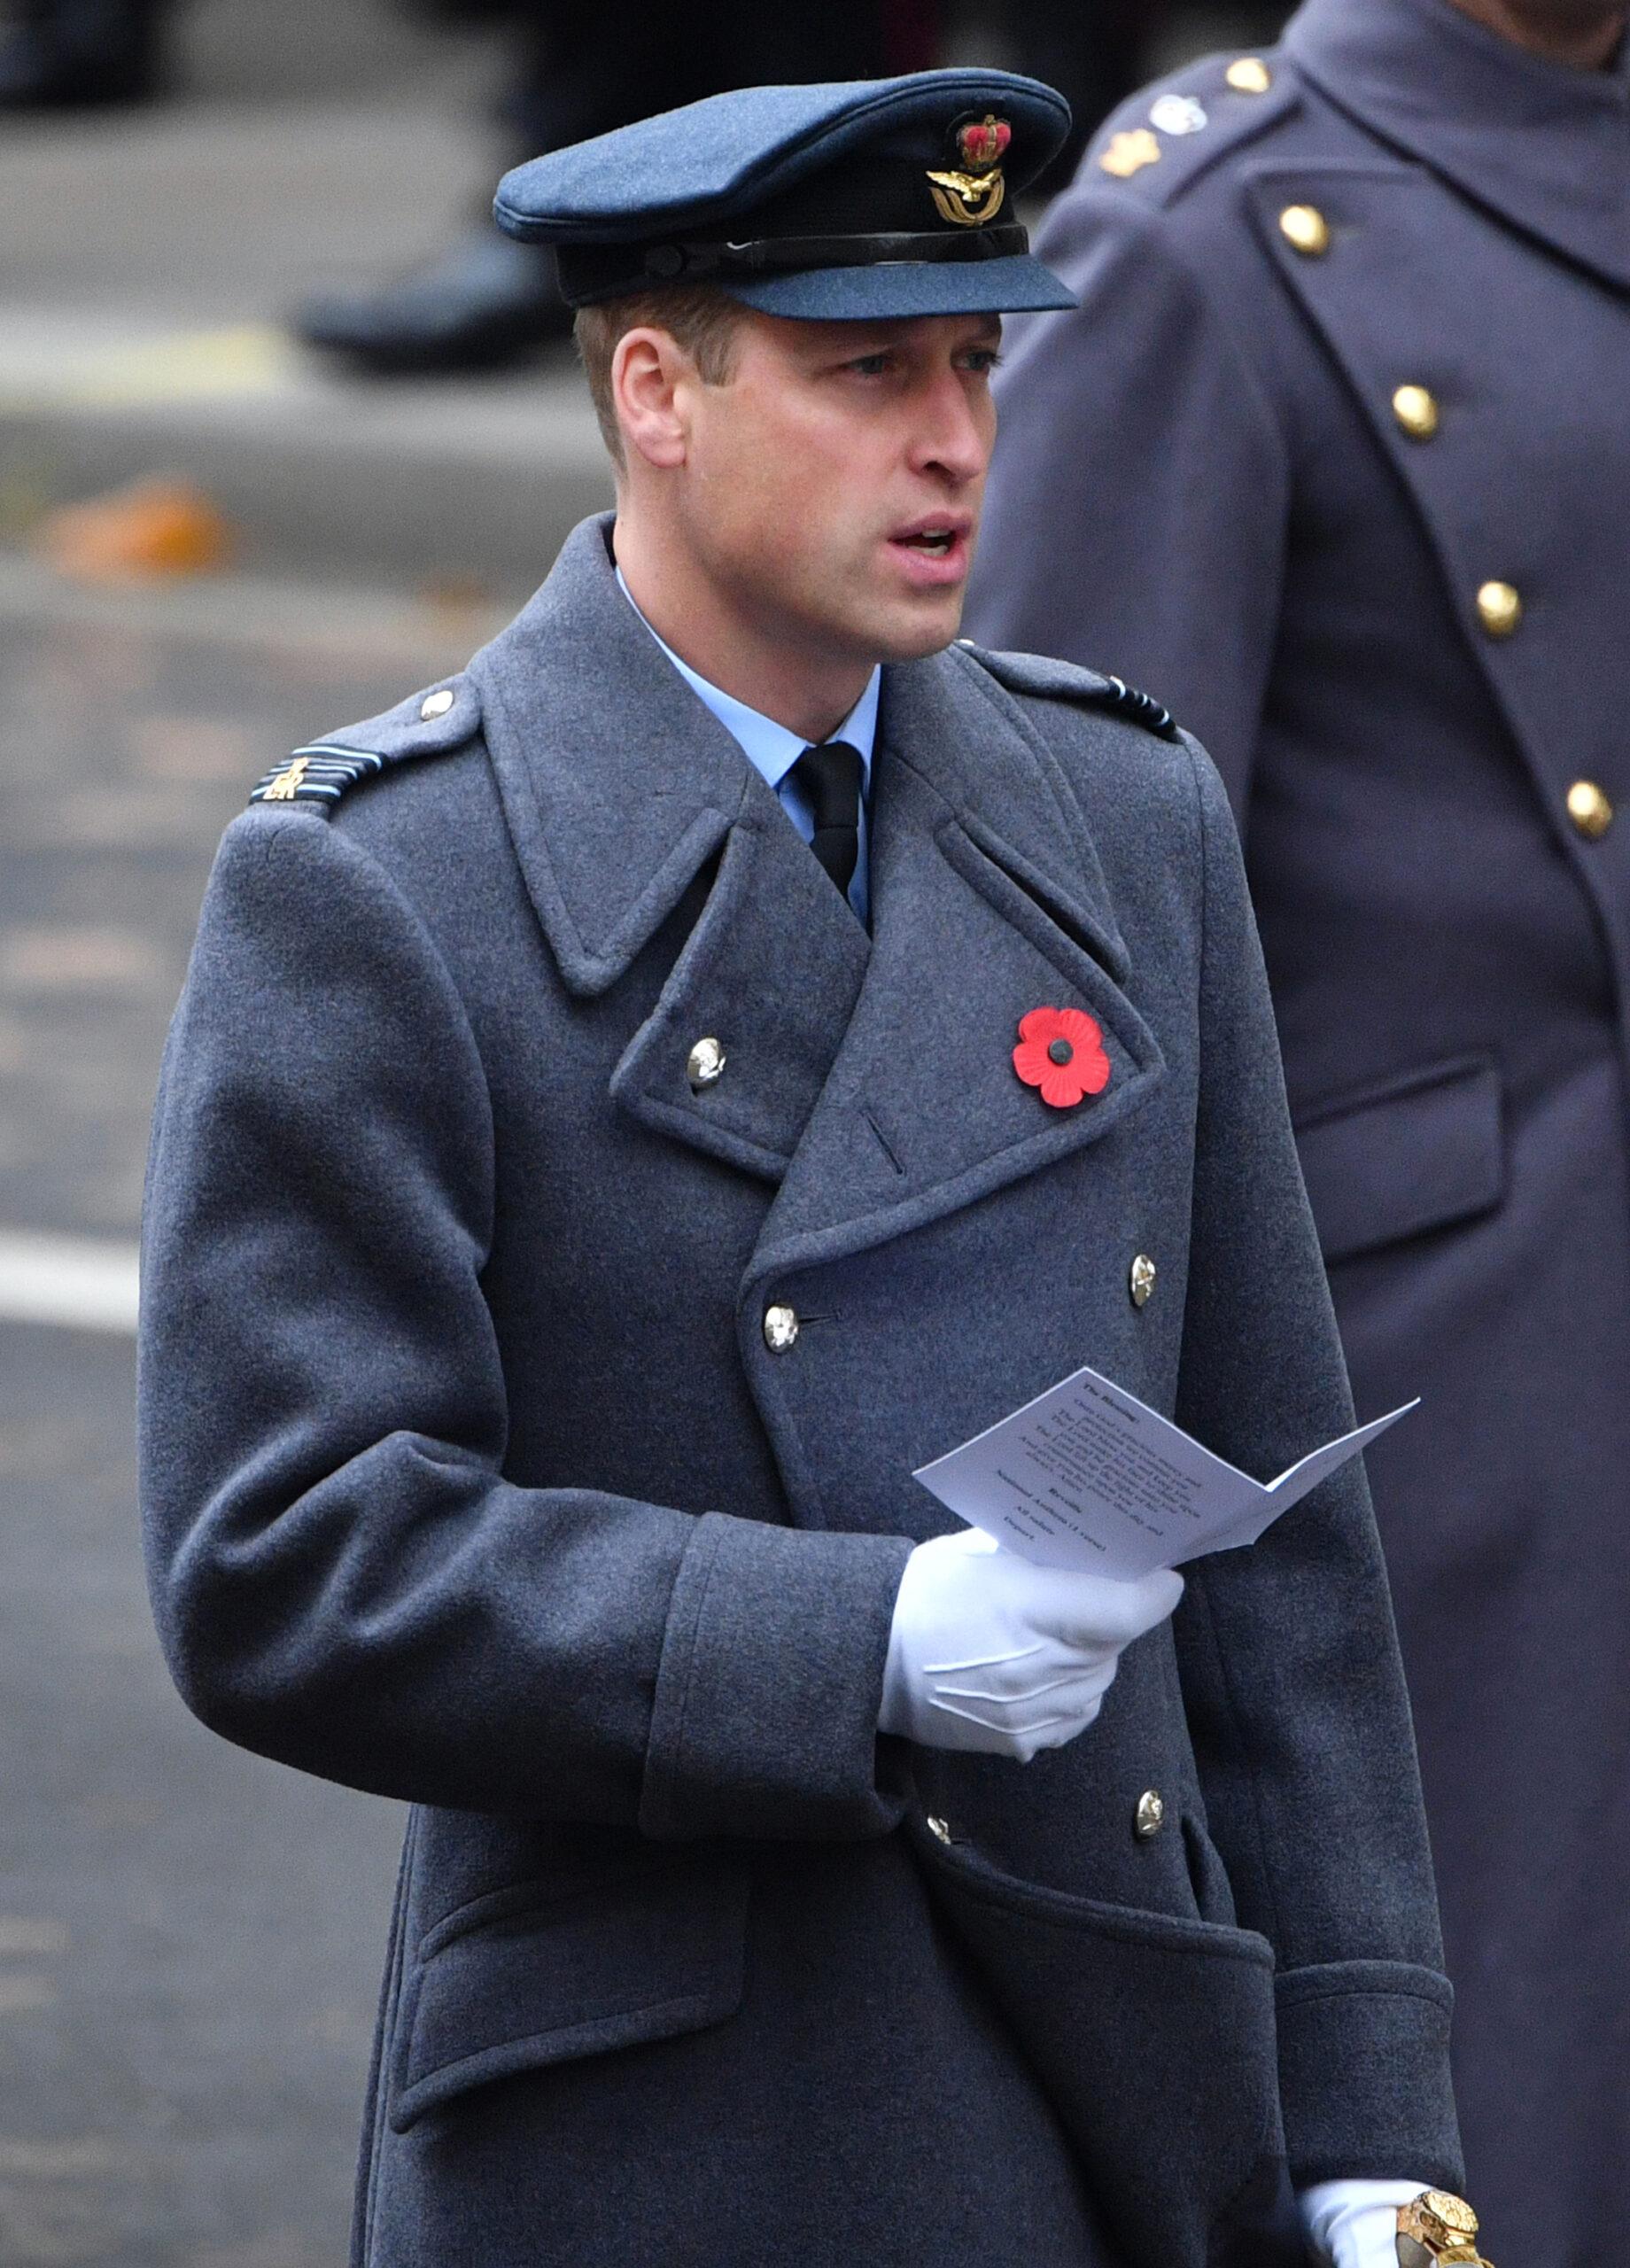 Members of The Royal Family attend the National Service of Remembrance